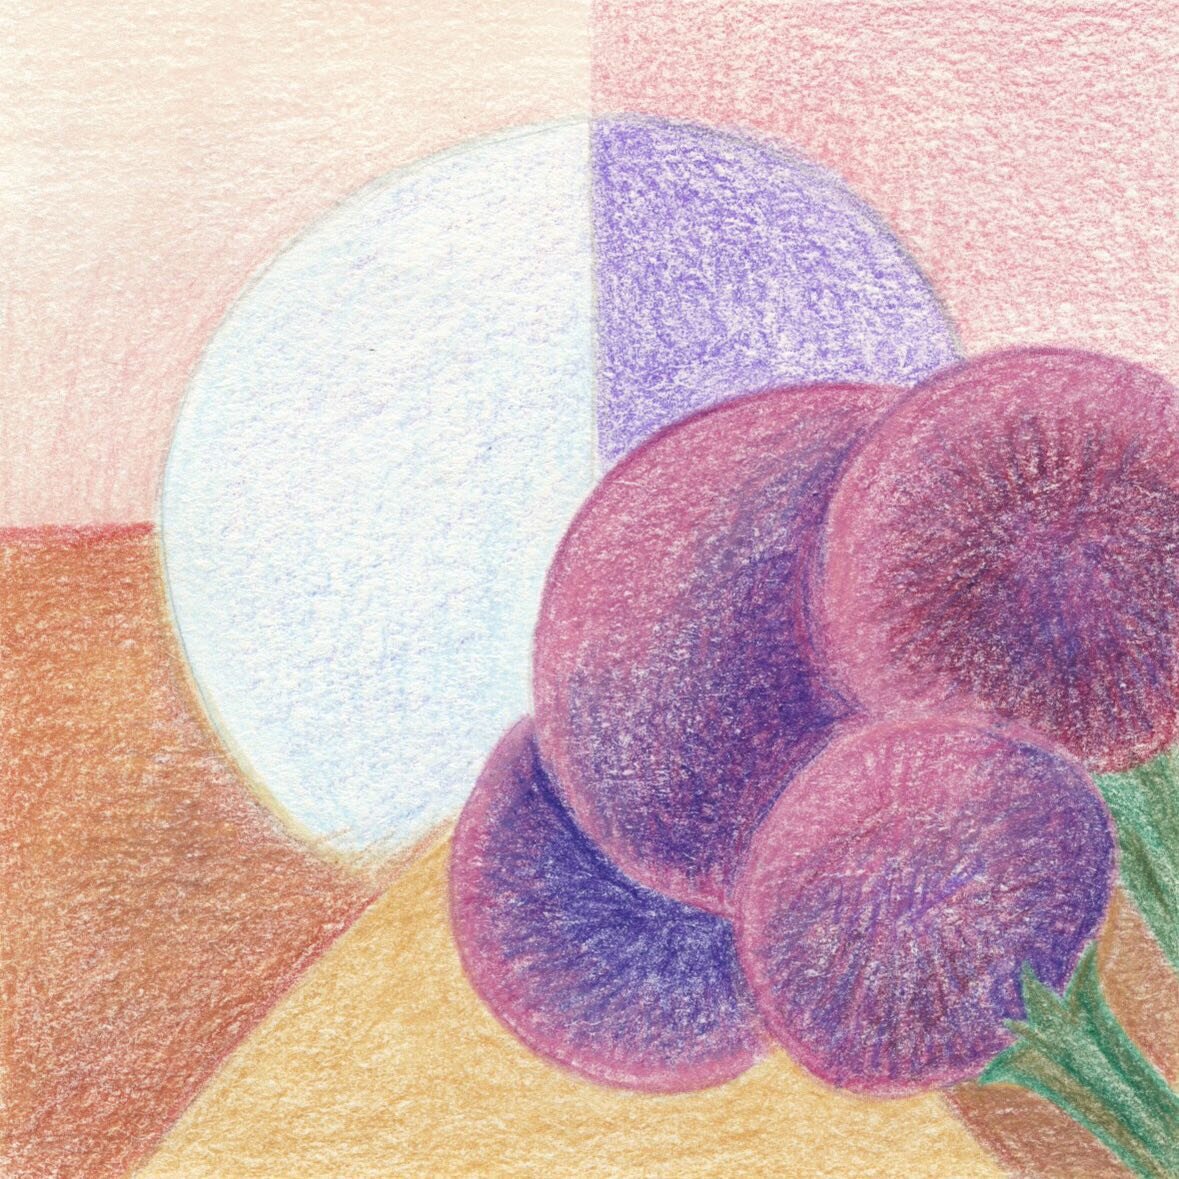 Daily tiny drawing&hellip;flowers

#dailydrawing #coloredpencils #abstractnature #geometricabstraction #hilmaafklint